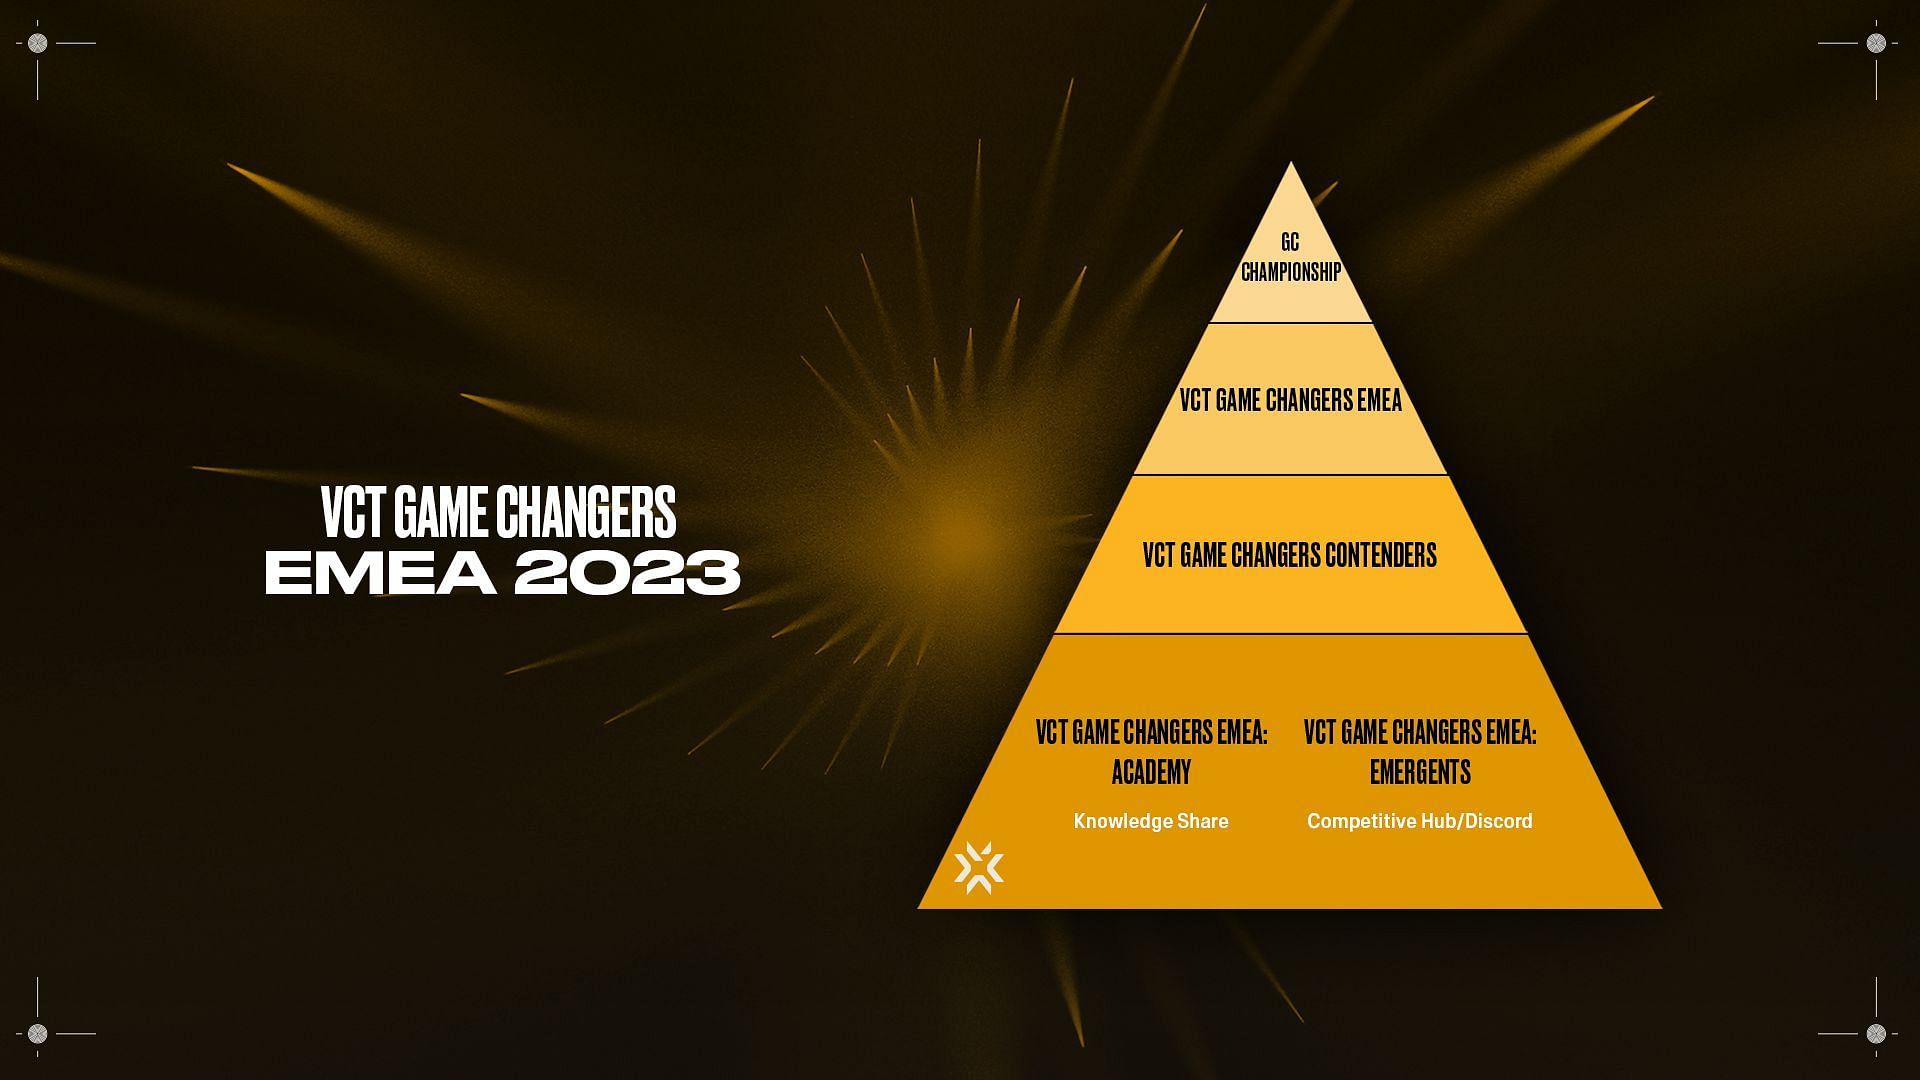 VCT Game Changers EMEA 2023 format changes chart (Image via Riot Games)